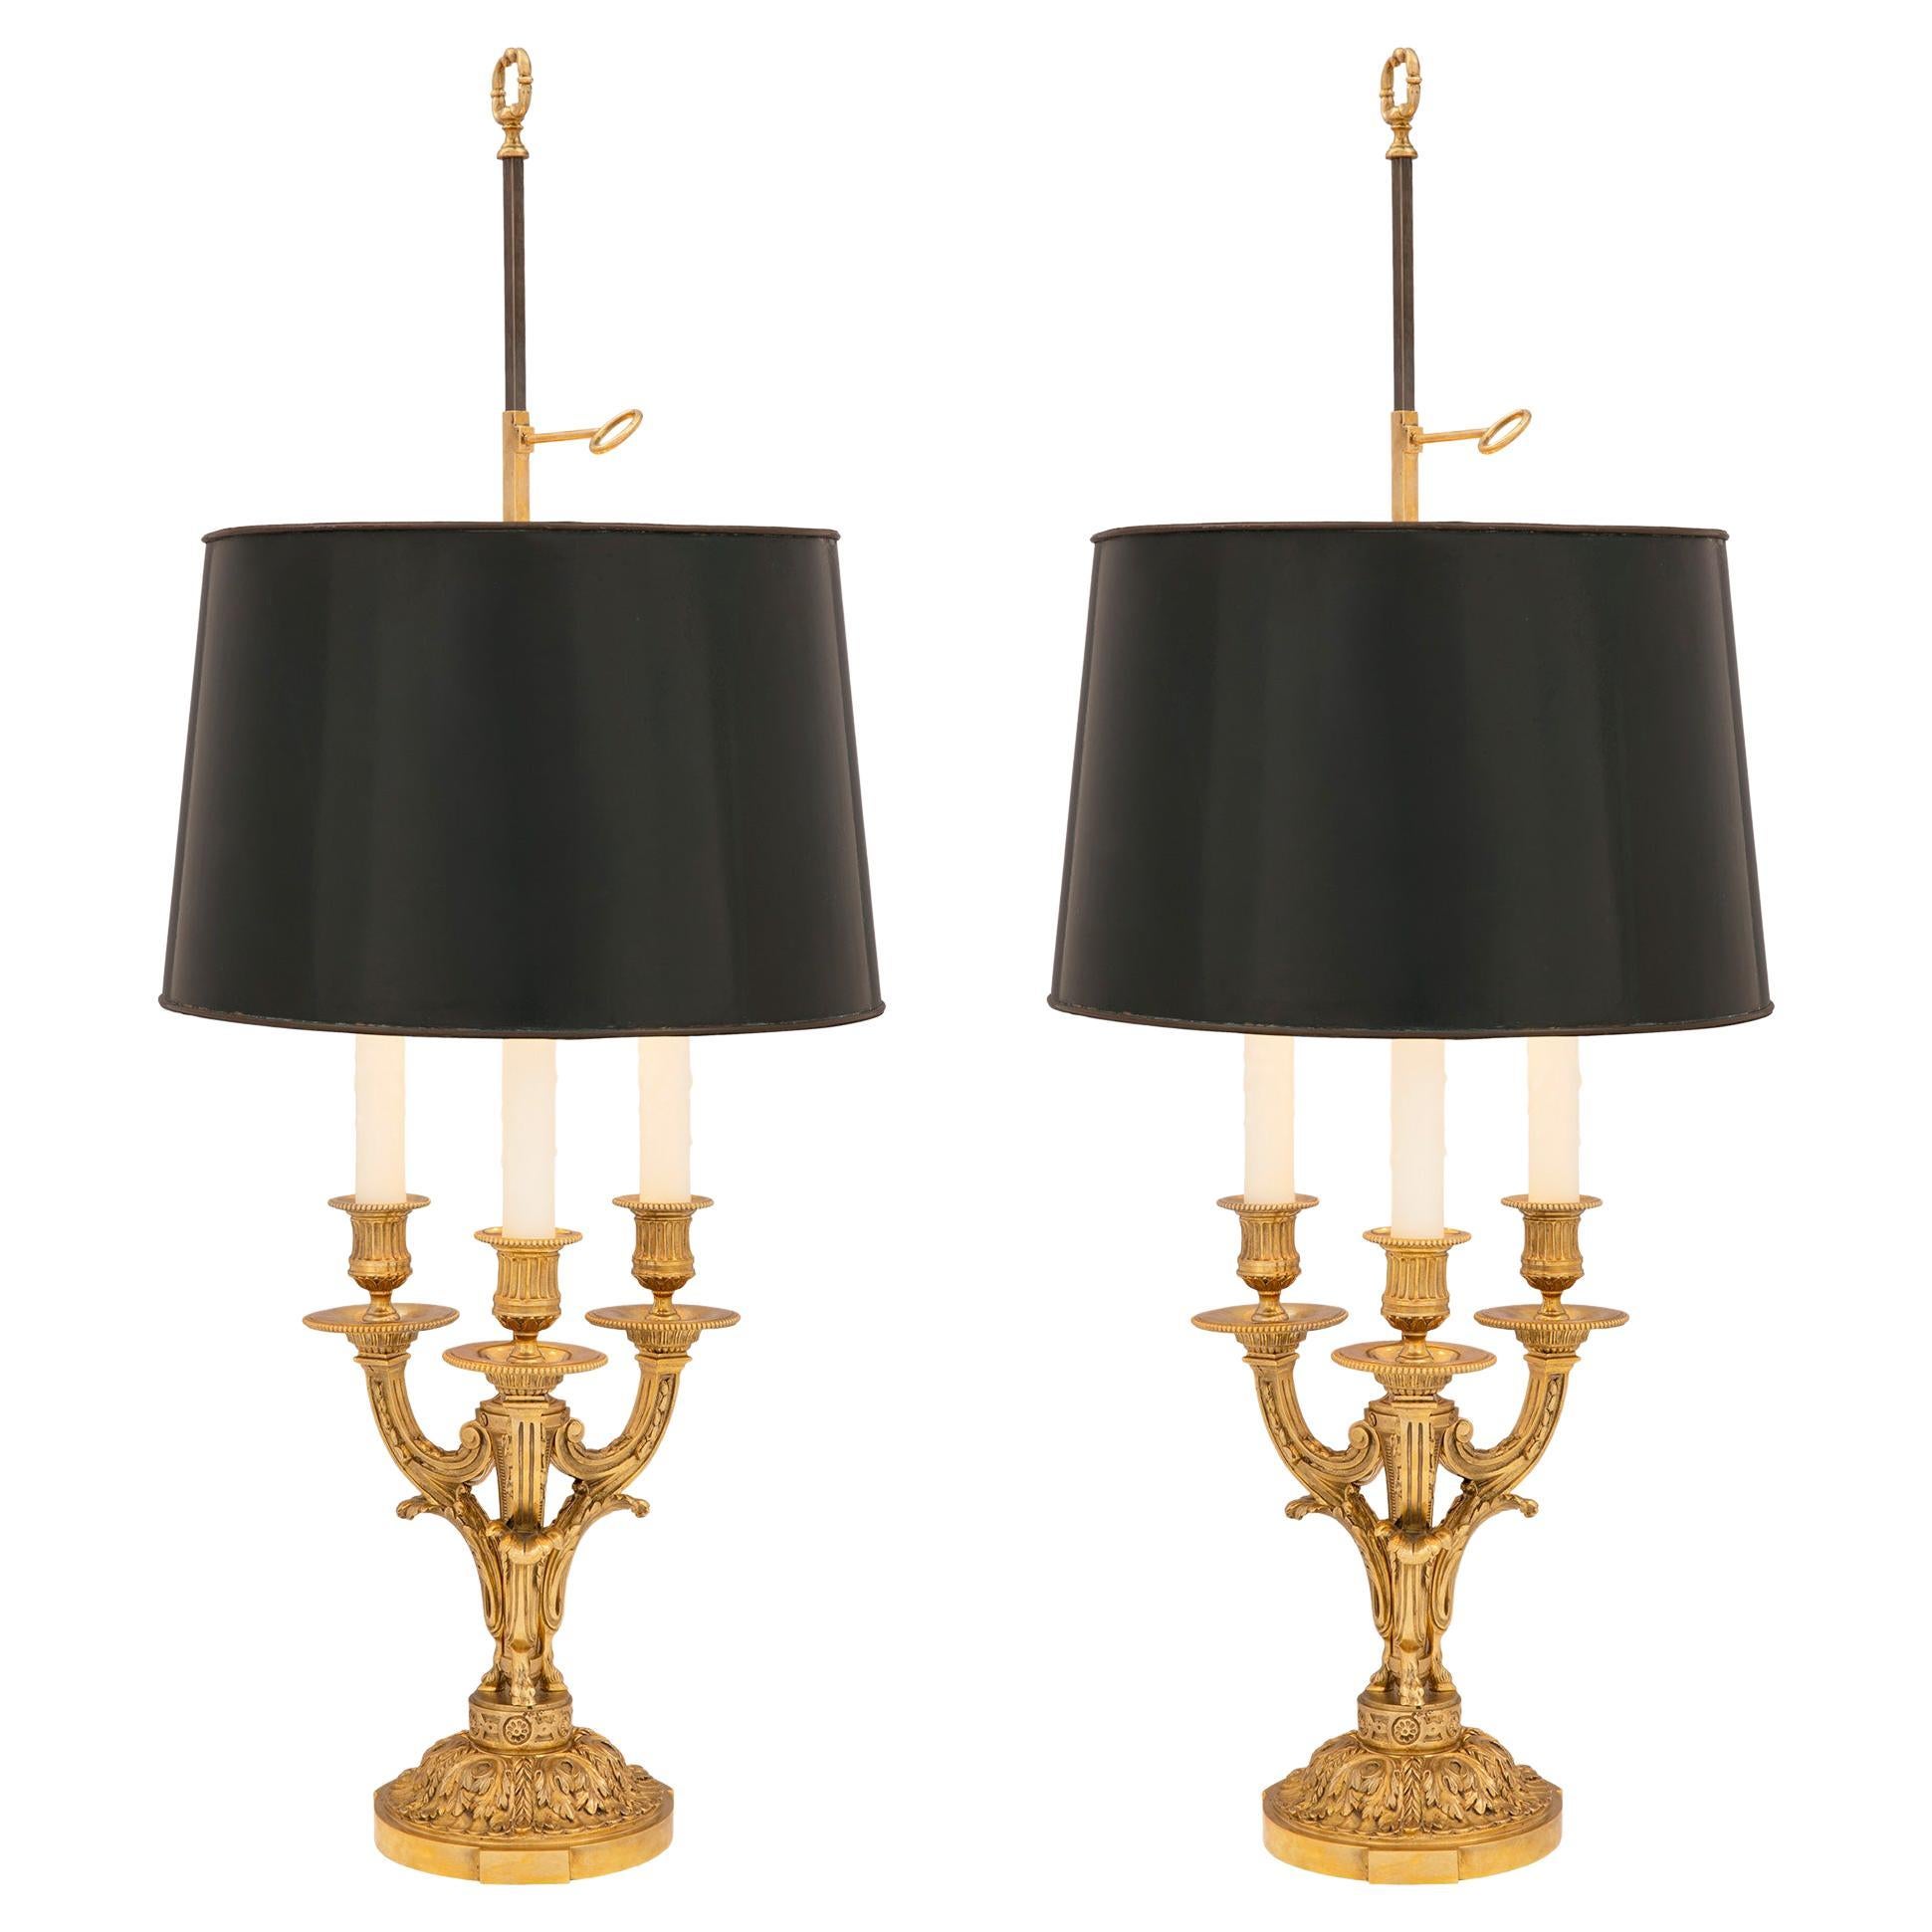 Pair of French Mid-19th Century Louis XVI Style Ormolu Bouilotte Lamps